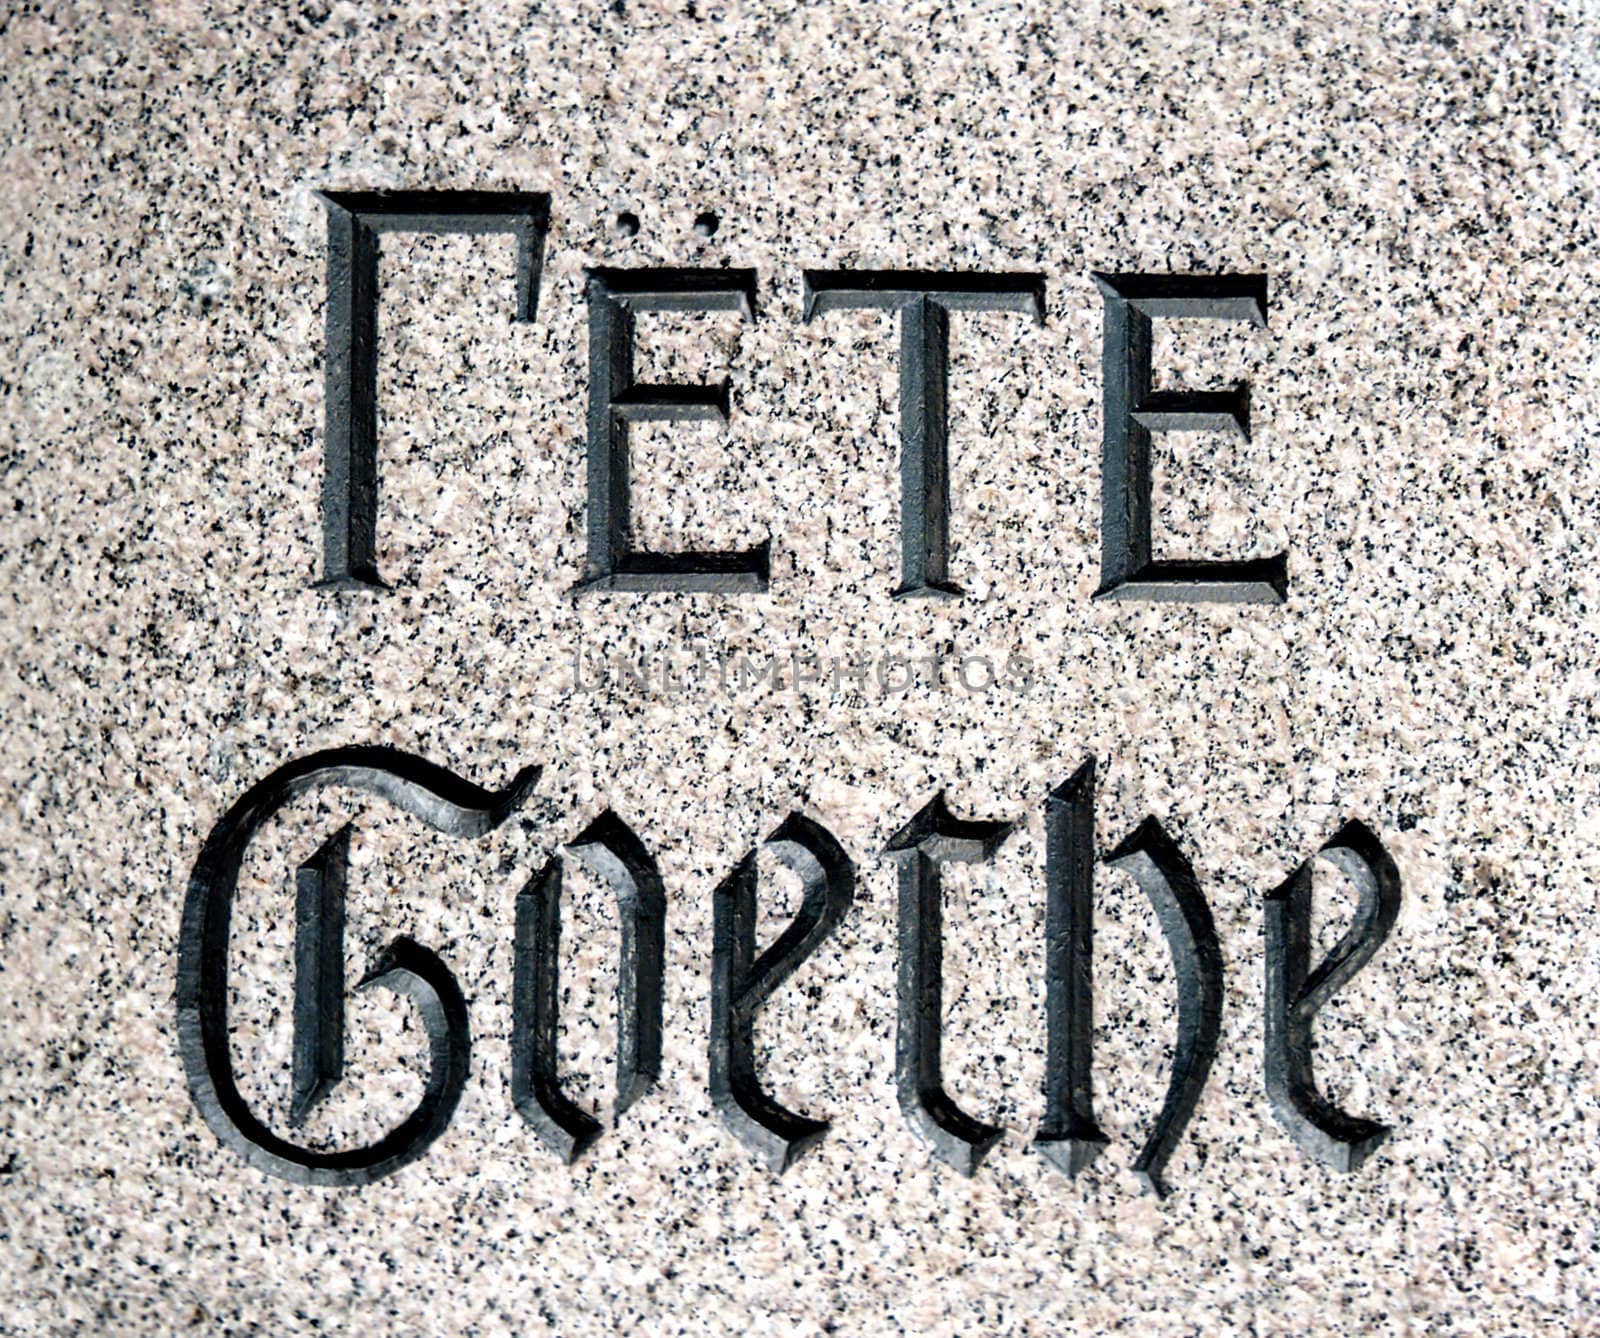 Lettering on the granitic surface by mulden